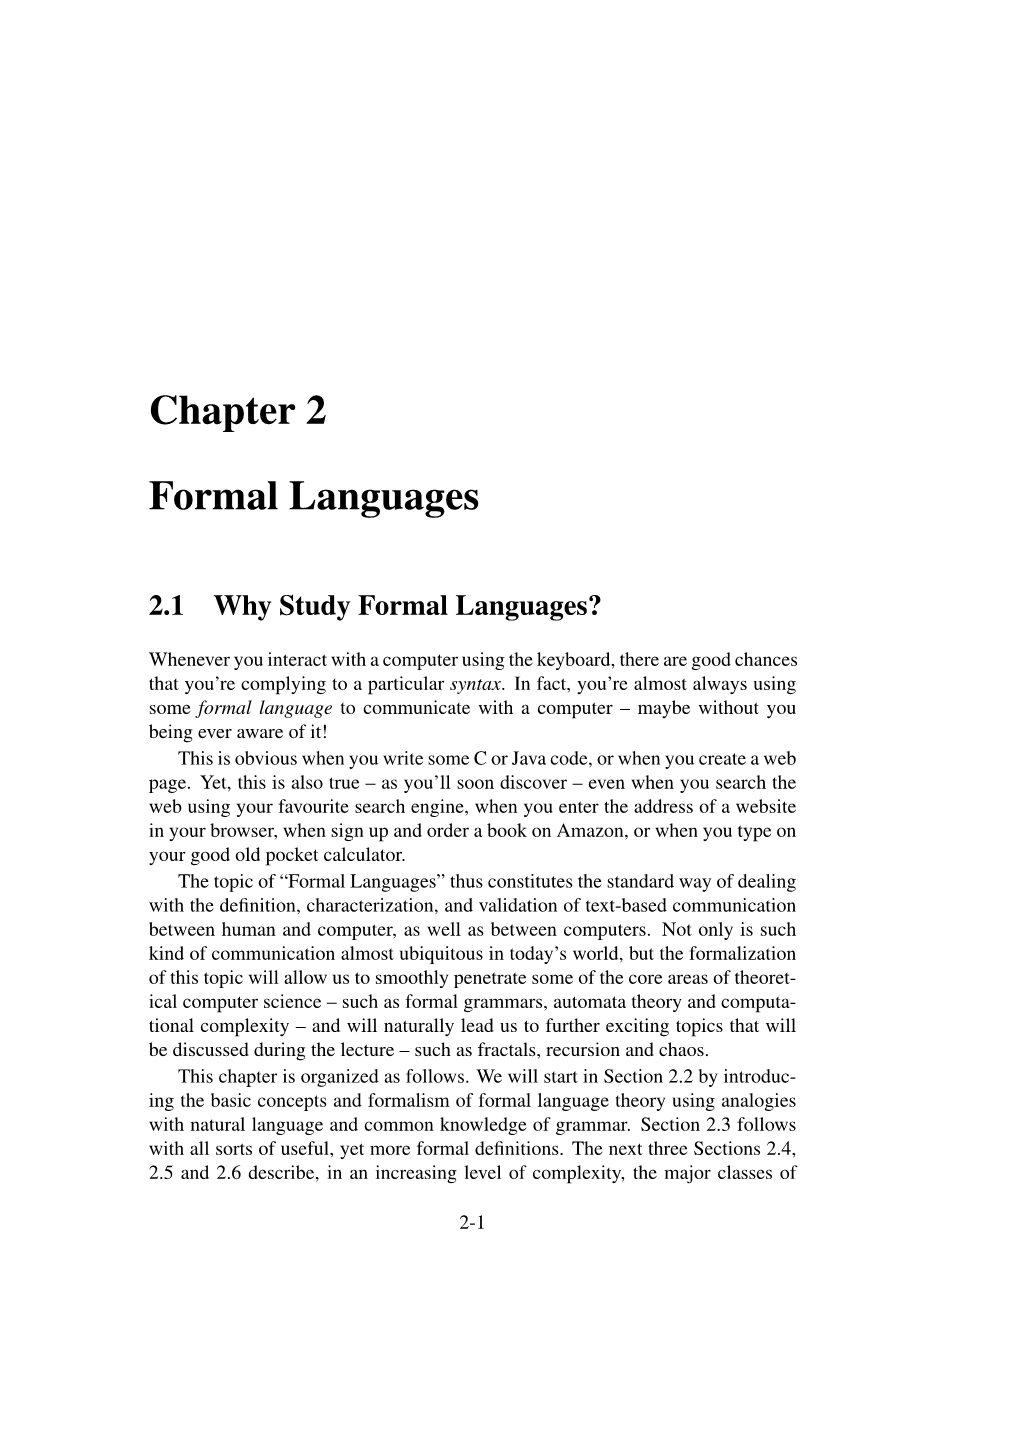 Chapter 2 Formal Languages